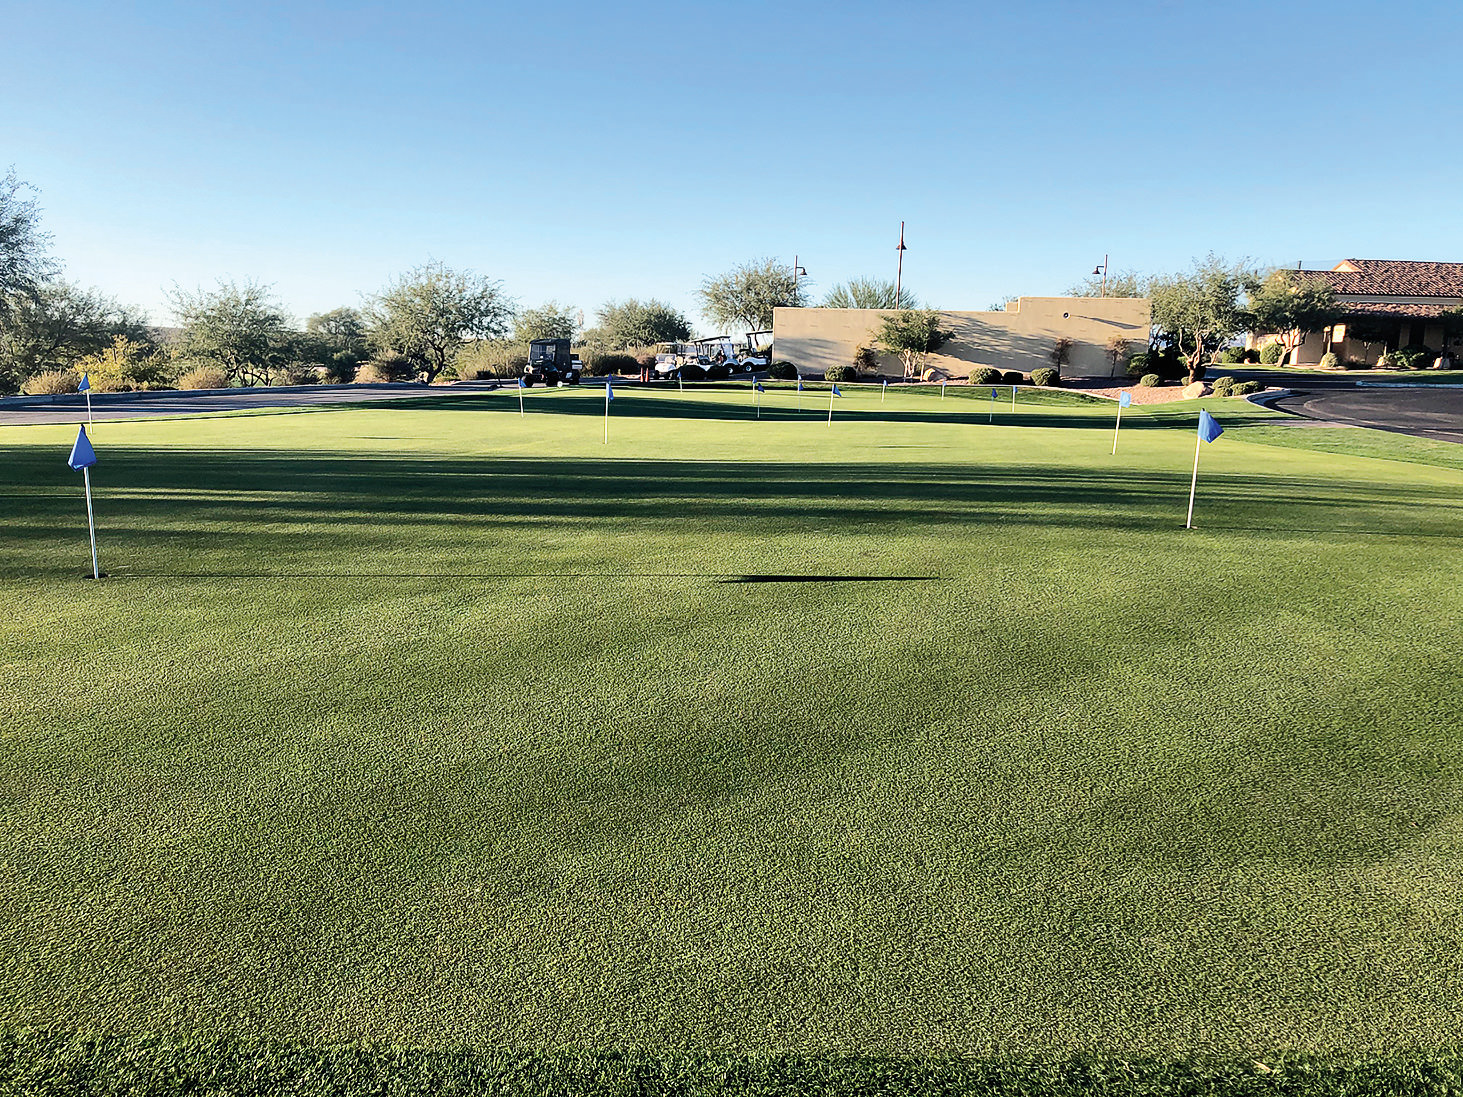 The green is empty and in prime condition, waiting for the Ranchette Putters to resume play! (Photo by Camille Esterman)